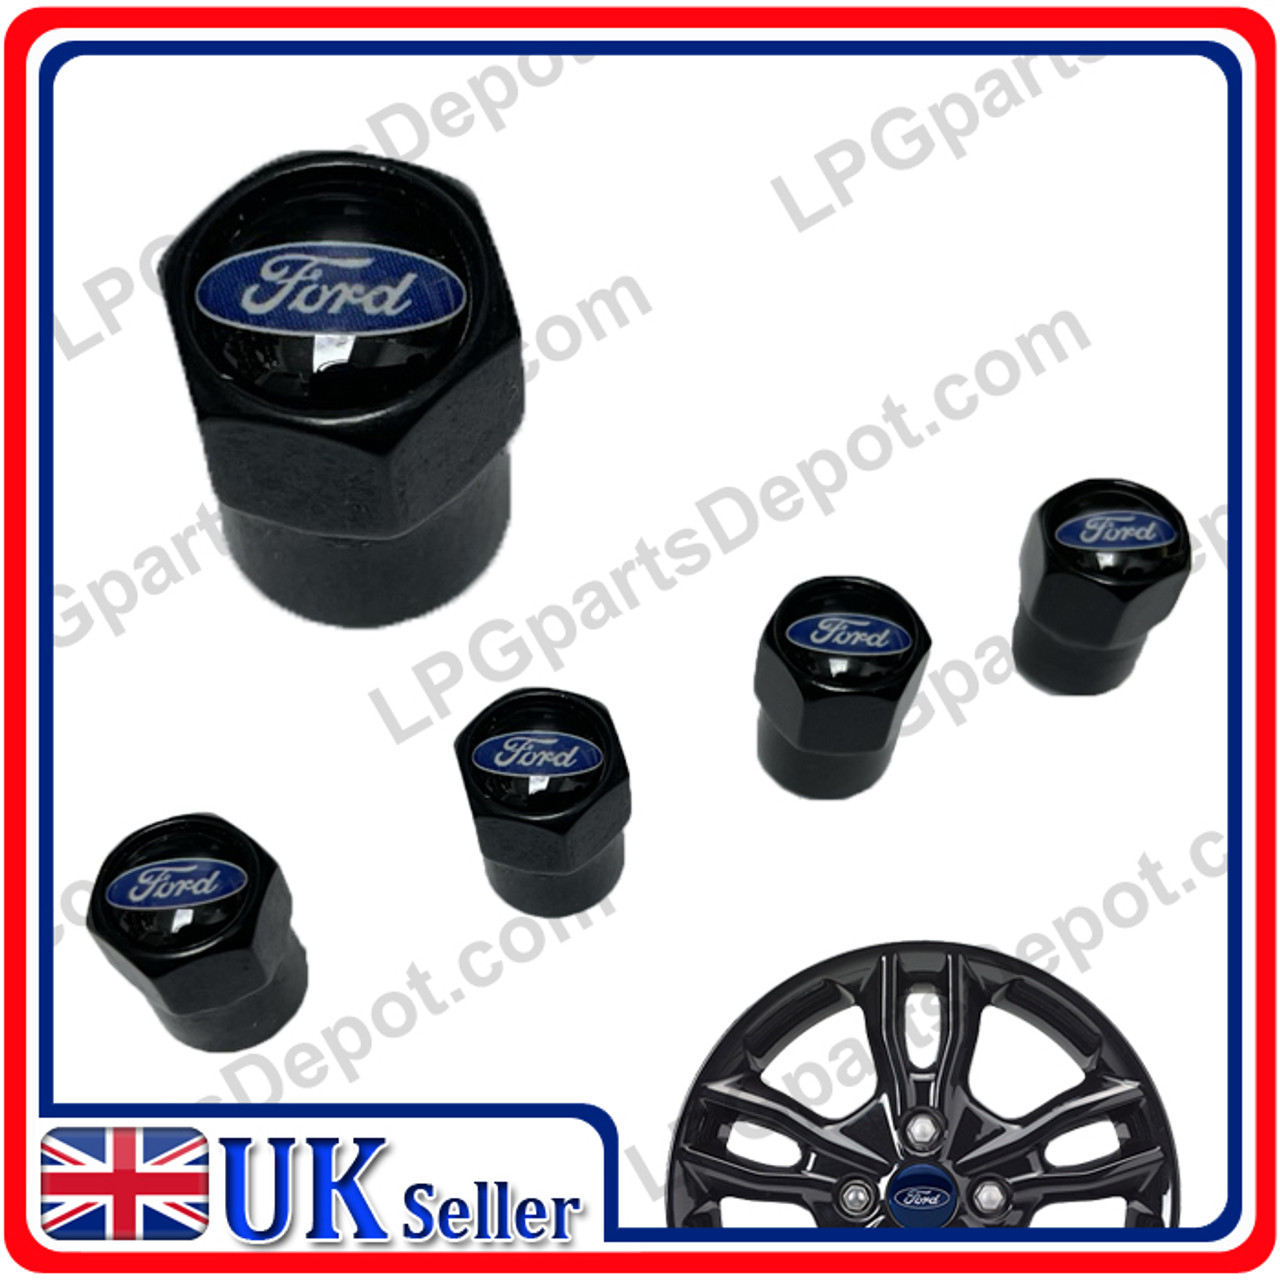 4x Tyre valve DUST CAPS for FORD MONDEO, GALAXY, FOCUS. KUGA, EDGE